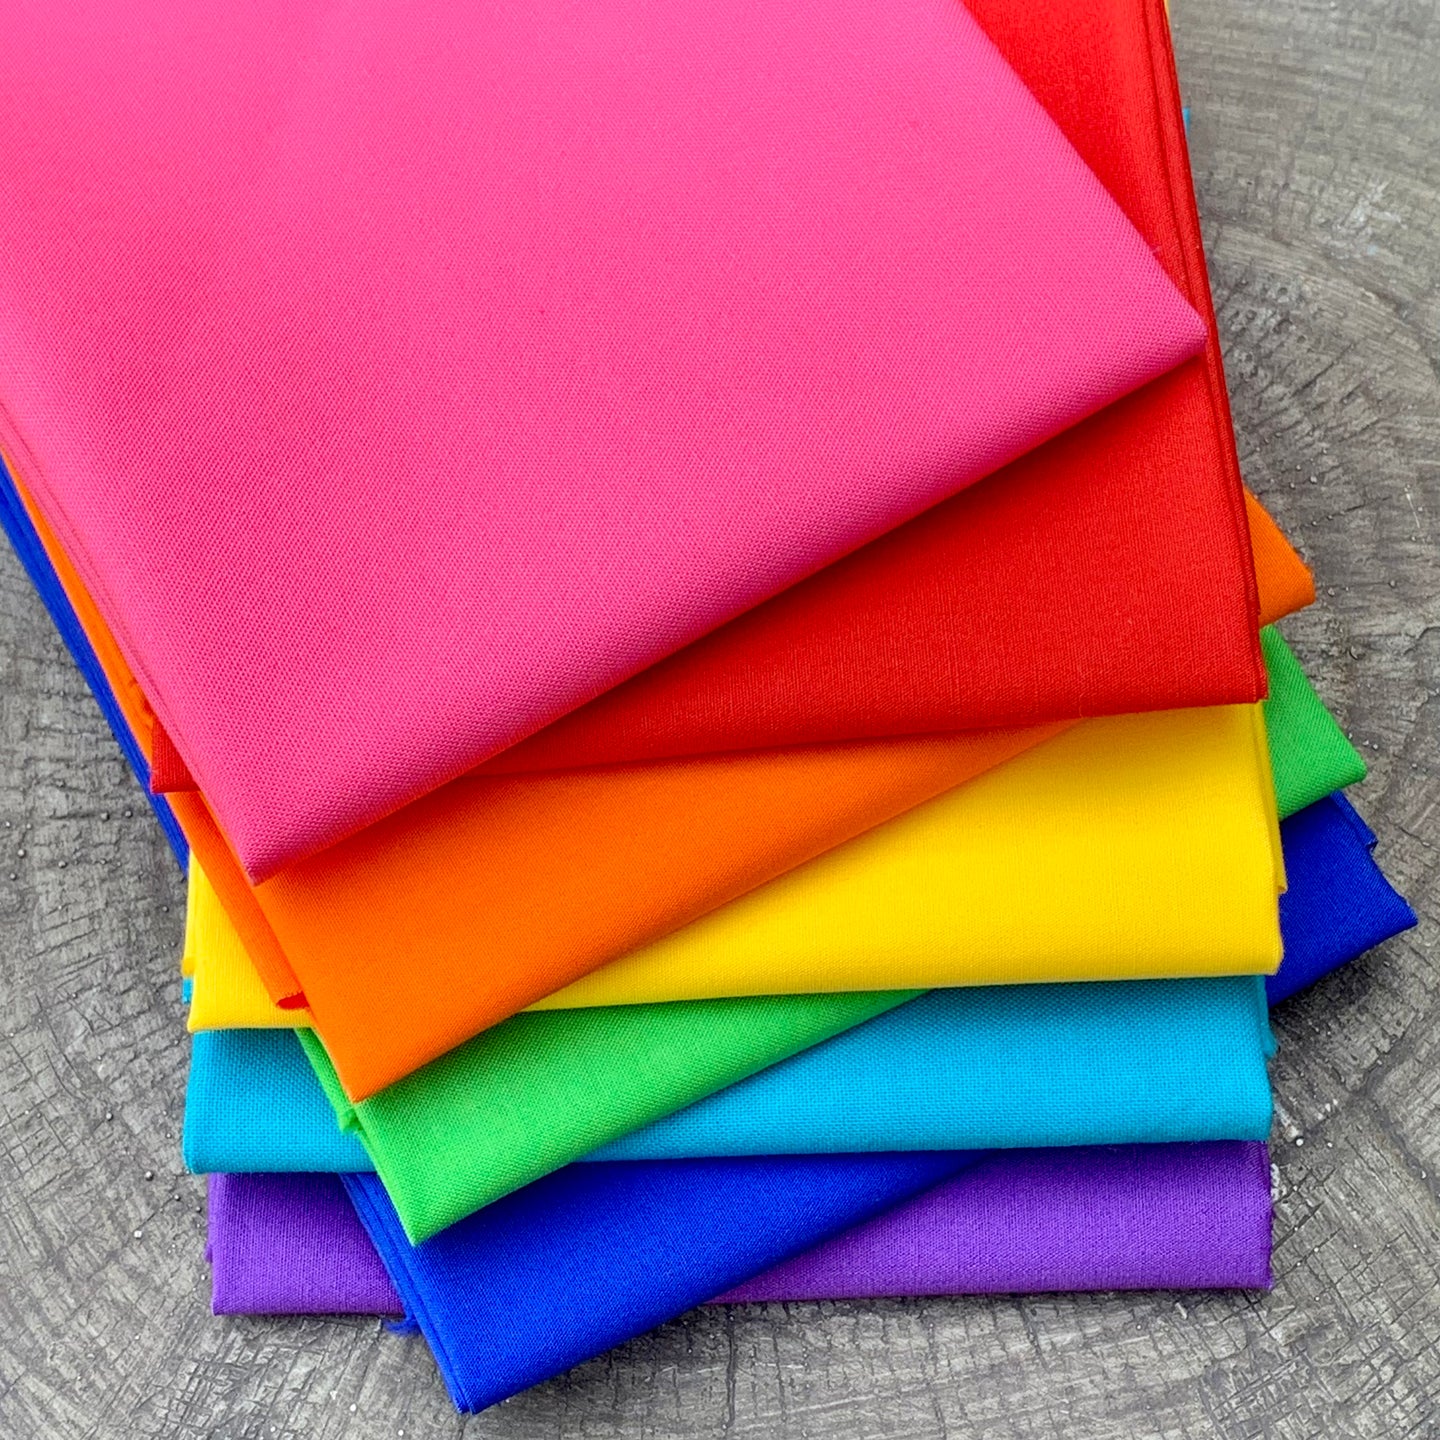 Rainbow solid bundle 8 fat quarters bright purple blue aqua green yellow orange red pink fabric material foundation paper piecing quilt project sewing garment